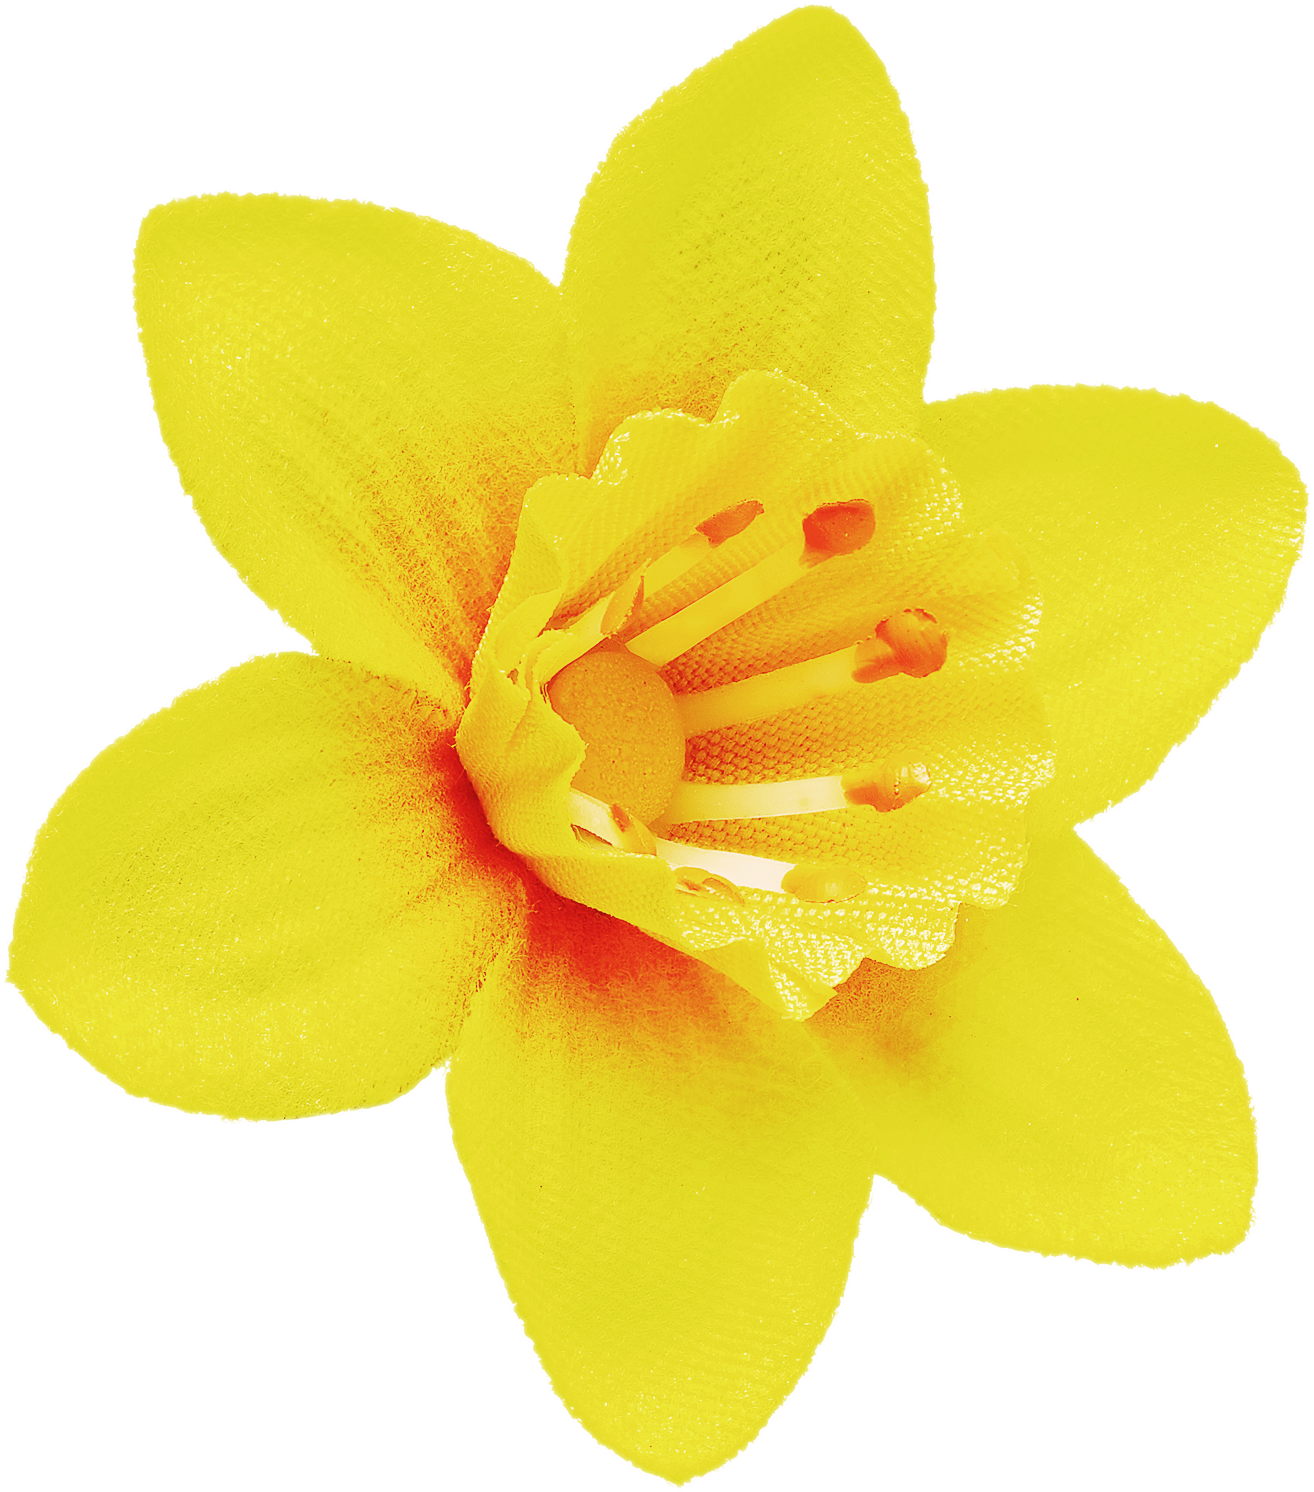 Vibrant Yellow Narcissus Flower PNG